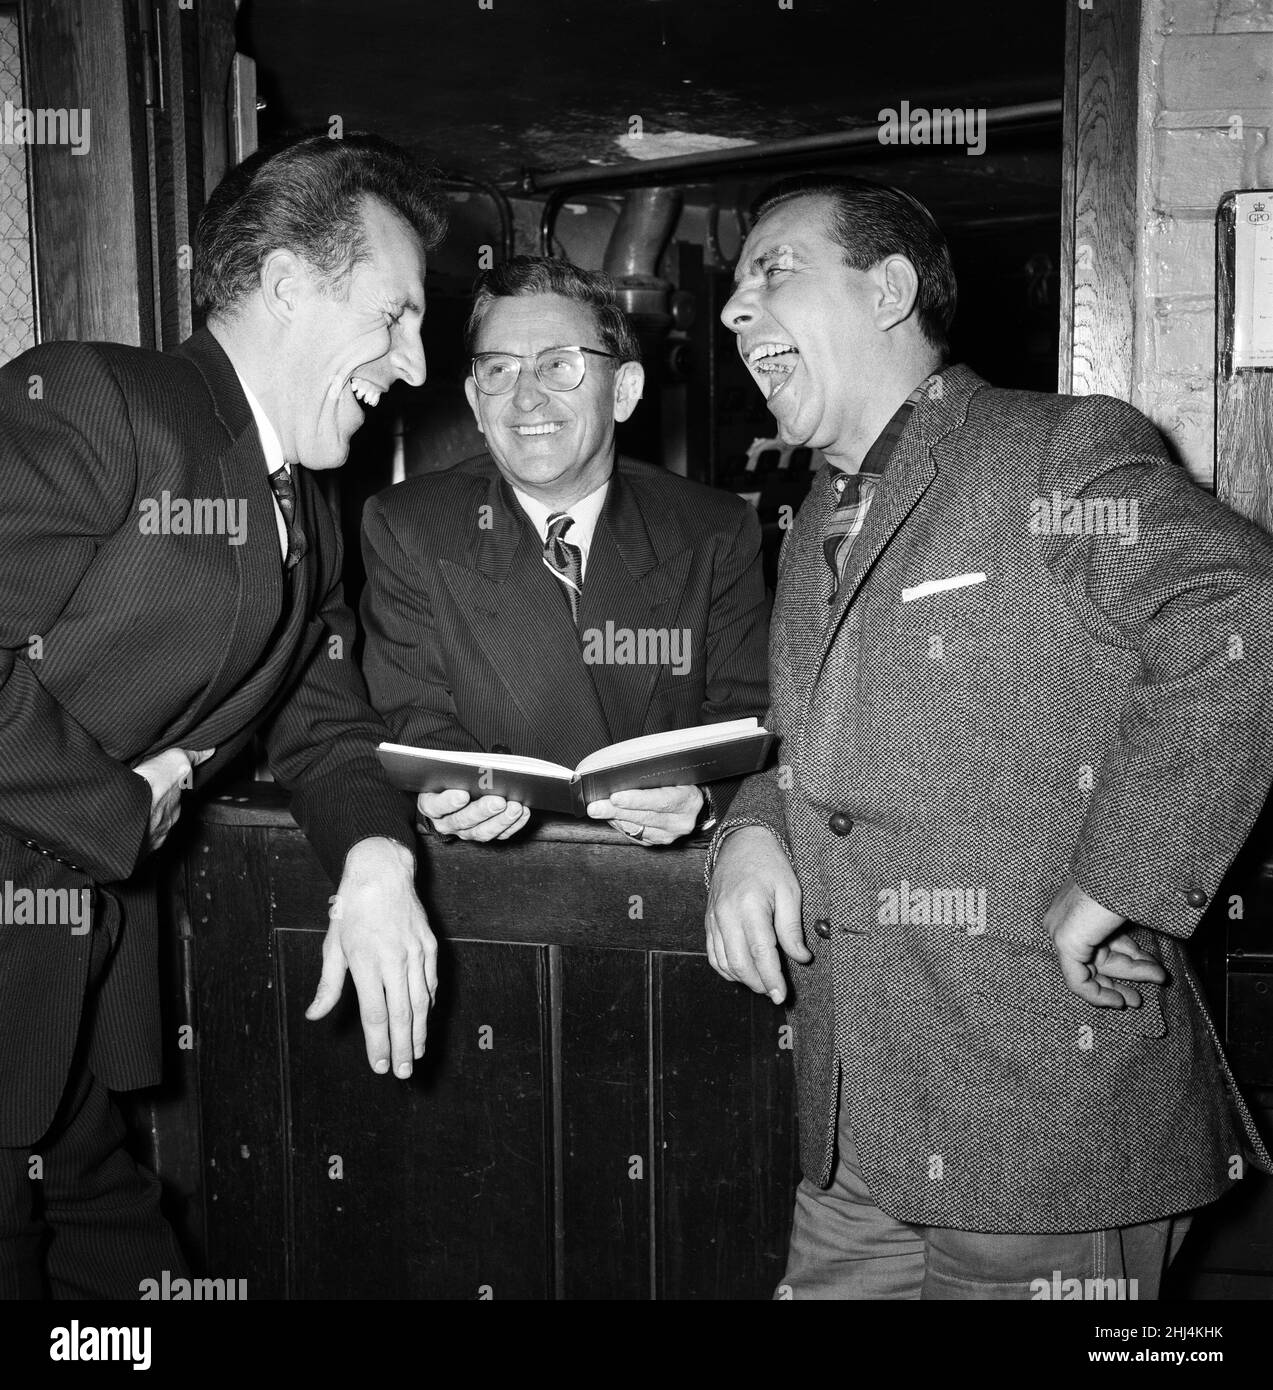 Bruce Forsyth (left) and Norman Wisdom (right) having a laugh and joke with the doorkeeper of the Sunday Night at the Palladium show, George Cooper. 29th November 1959. Stock Photo